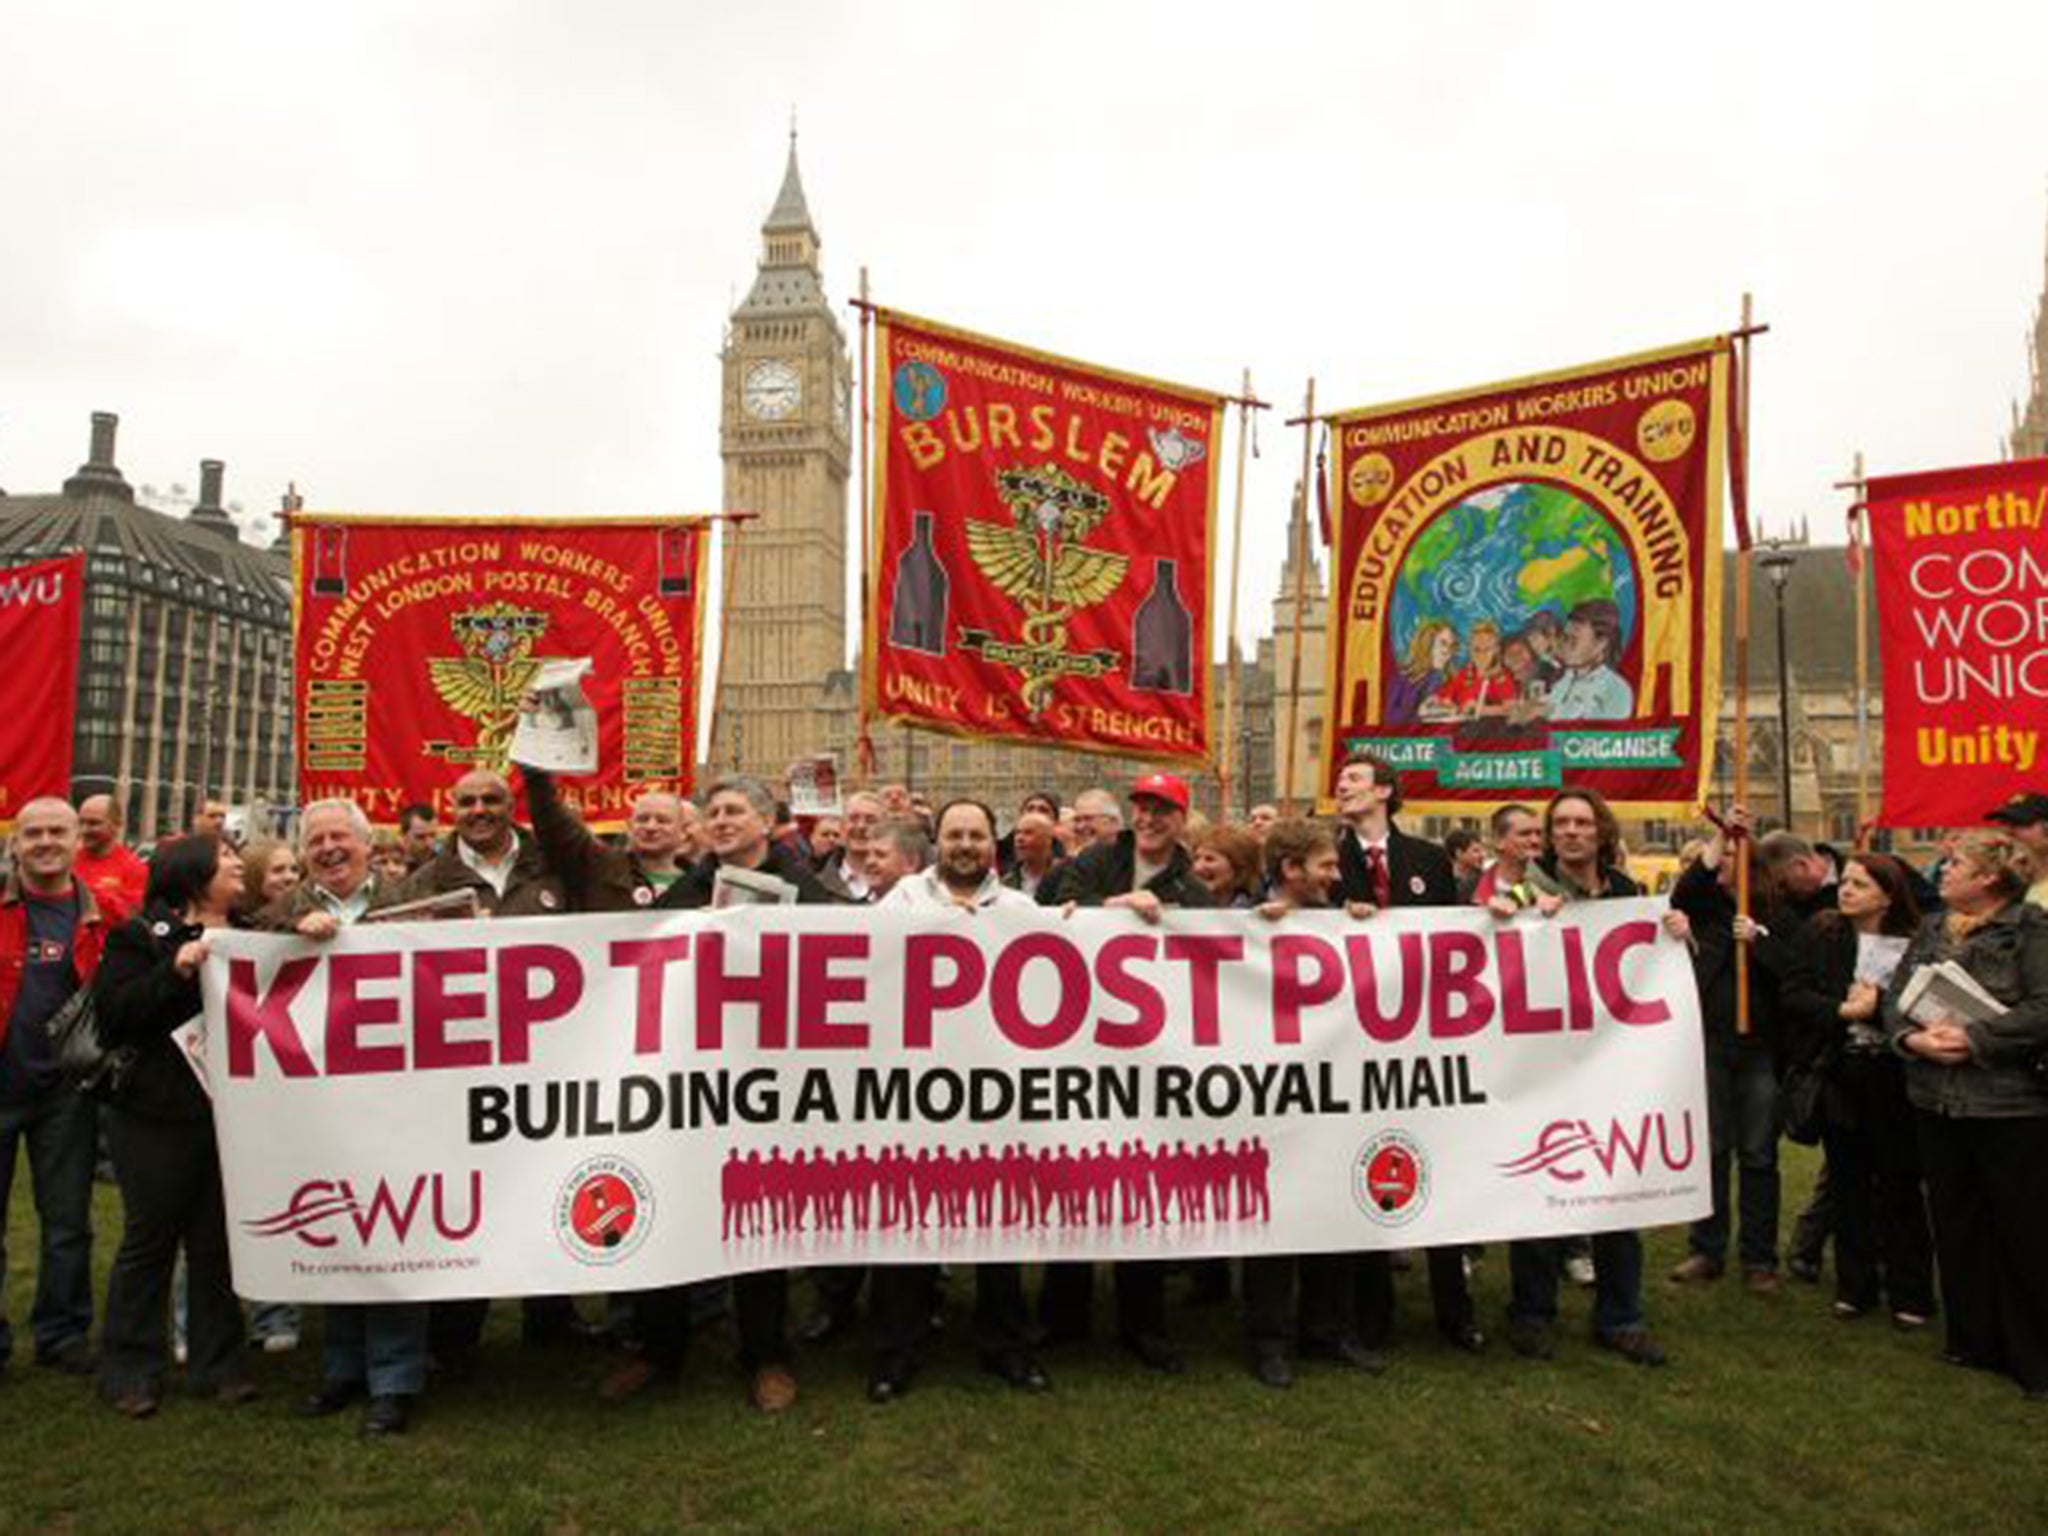 Postal workers protesting in 2009 over Royal Mail sell-off plans